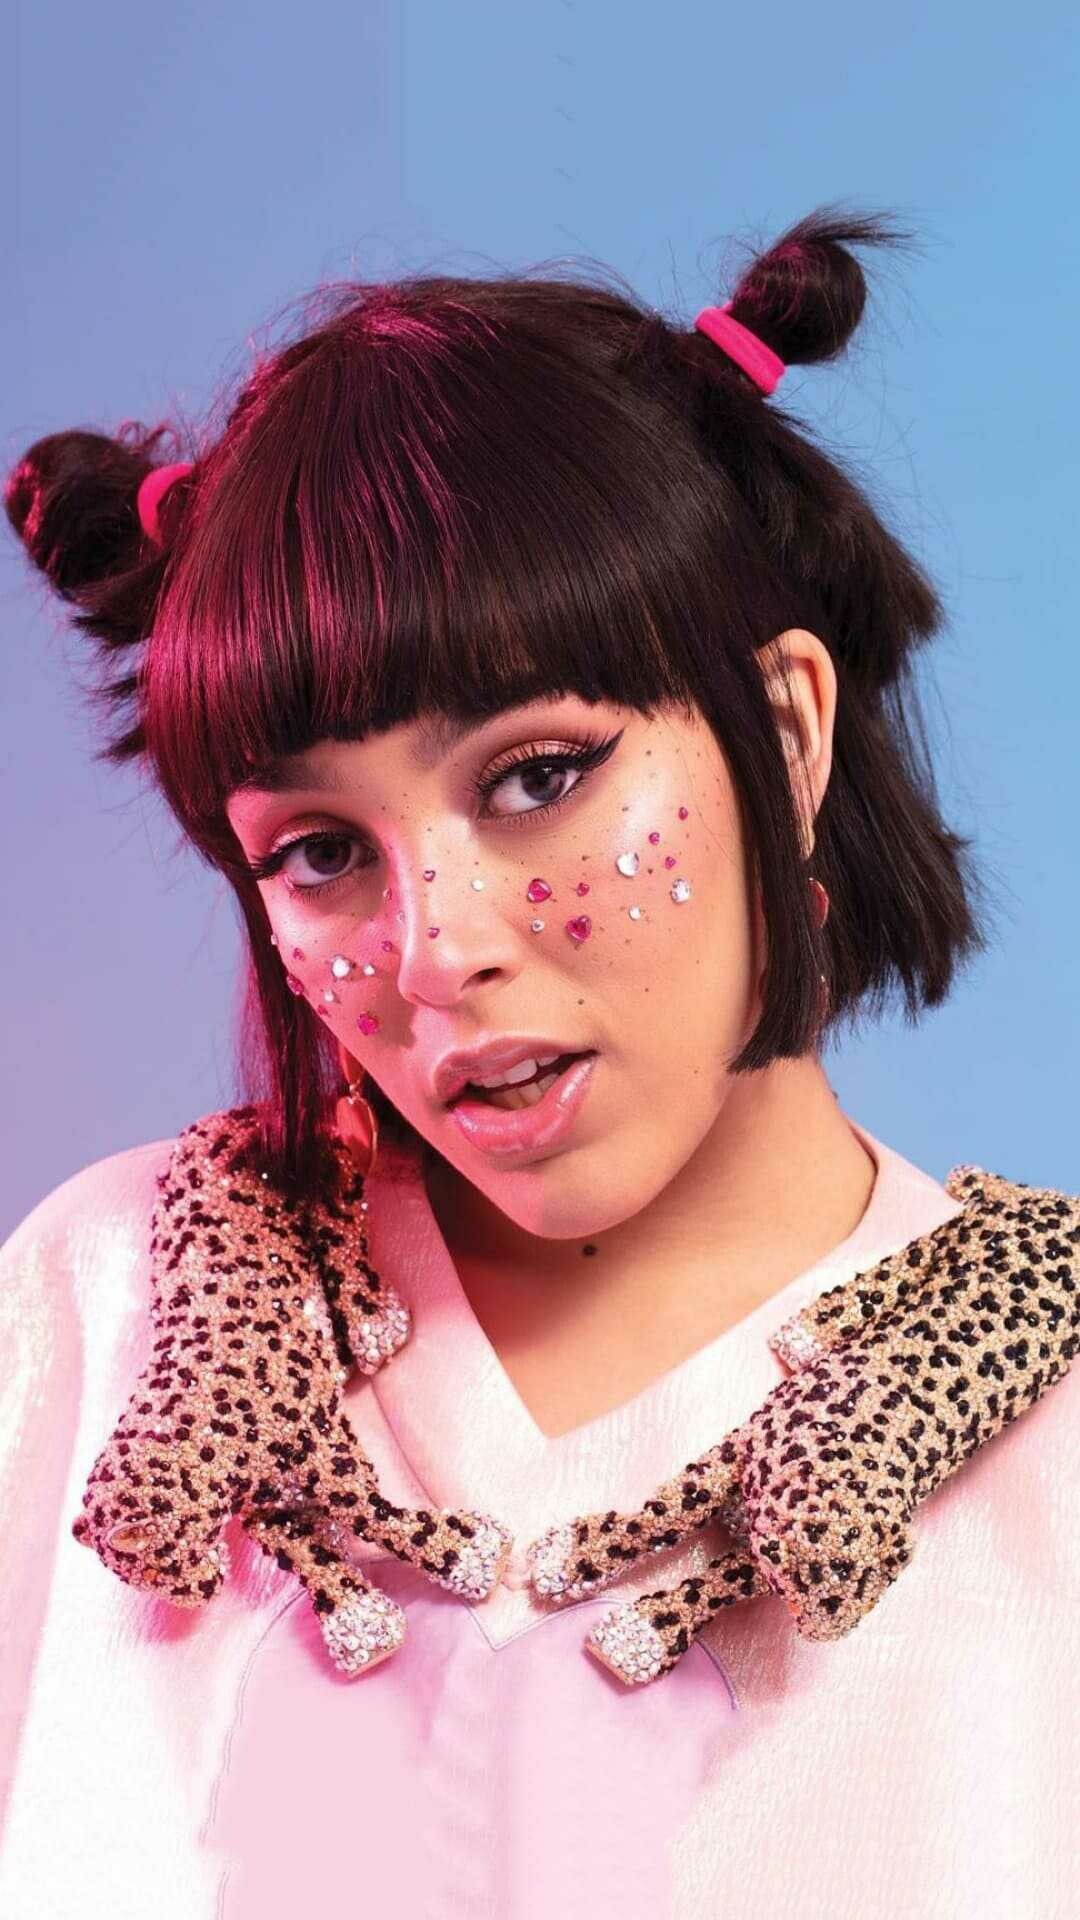 Hayley Kiyoko in a pink top with a leopard print collar and glitter on her face - Doja Cat